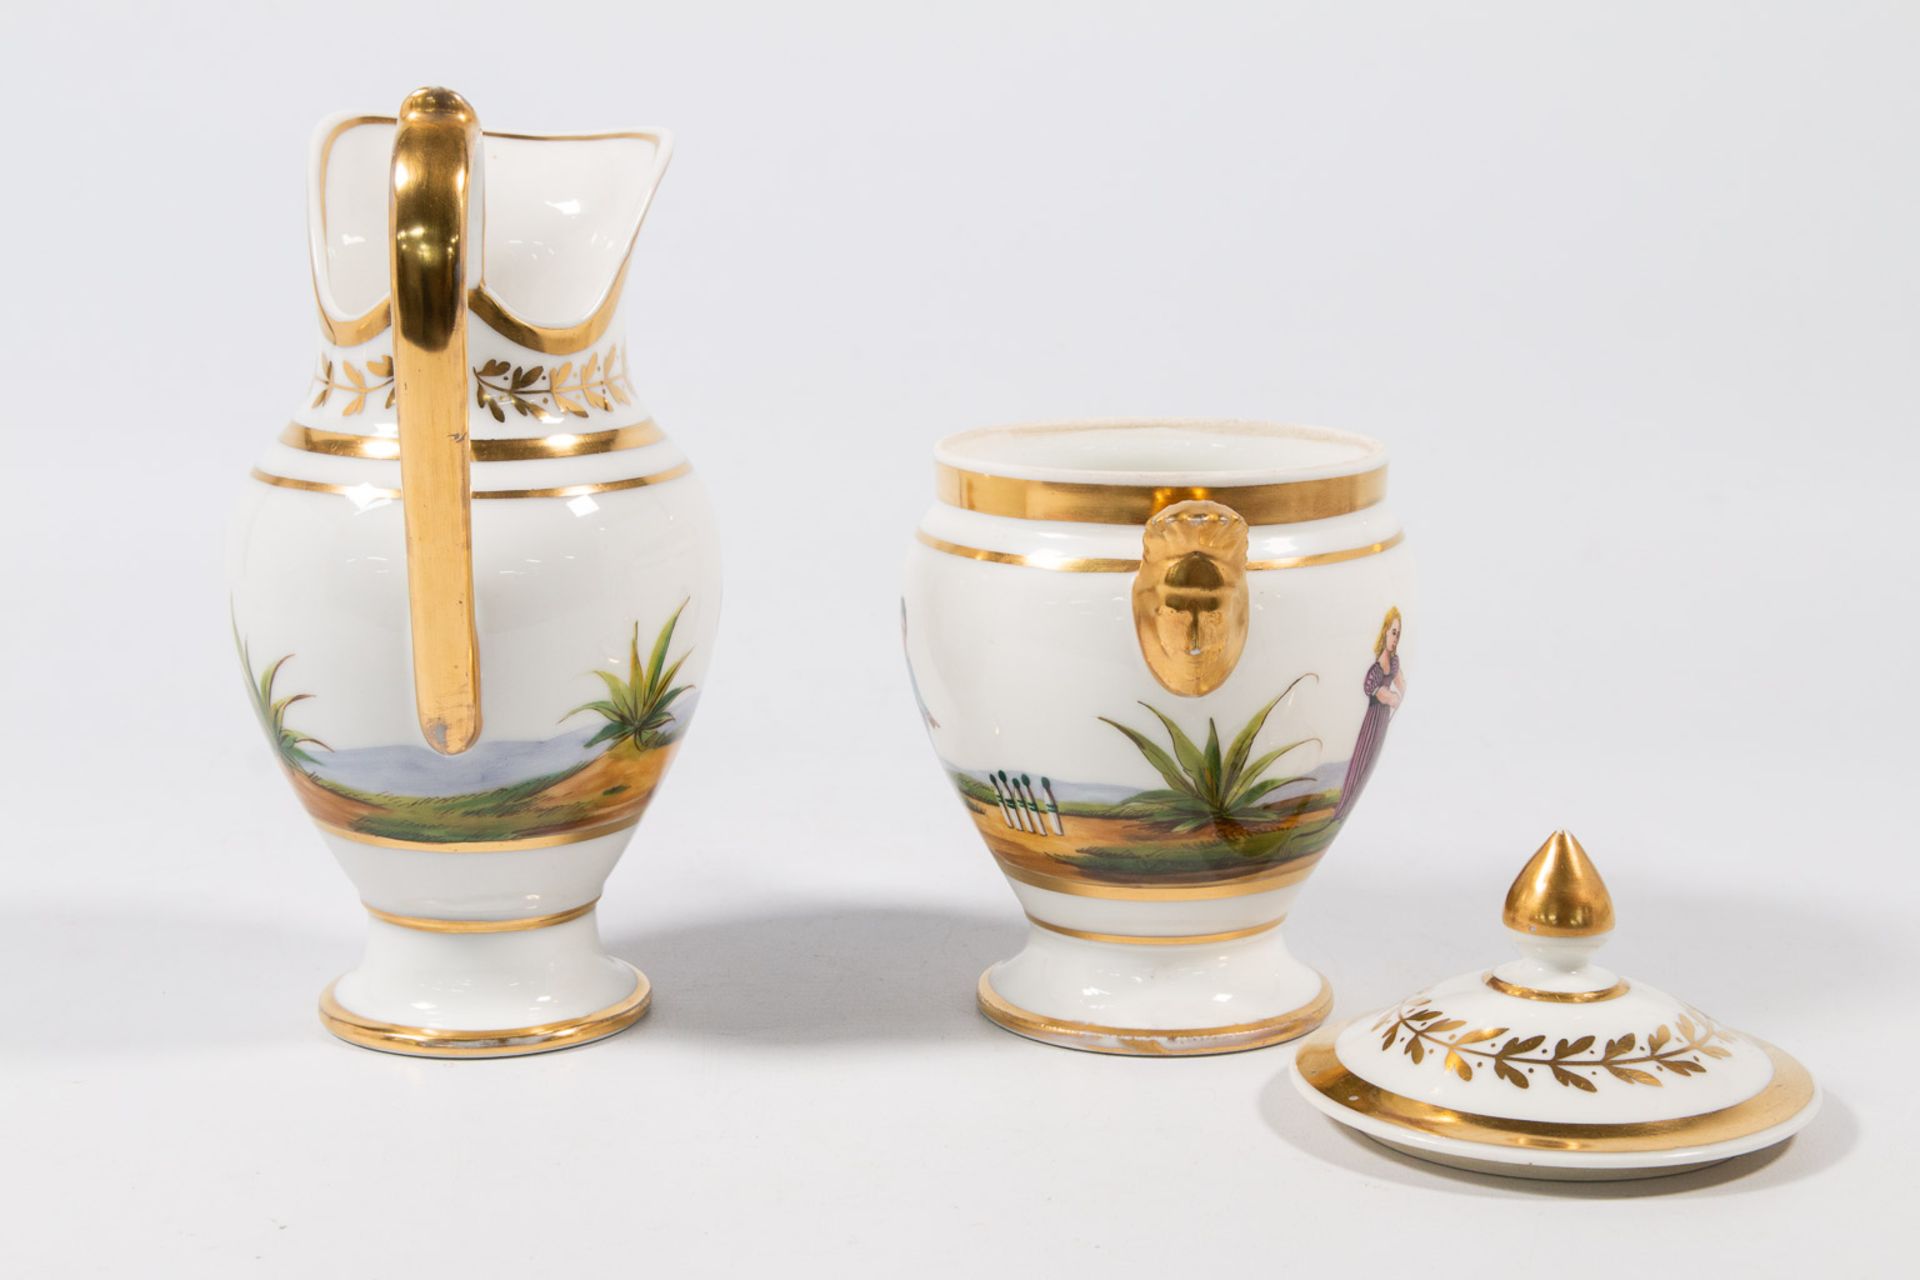 A Complete 'Vieux Bruxelles' coffee and tea service made of porcelain. - Image 34 of 53